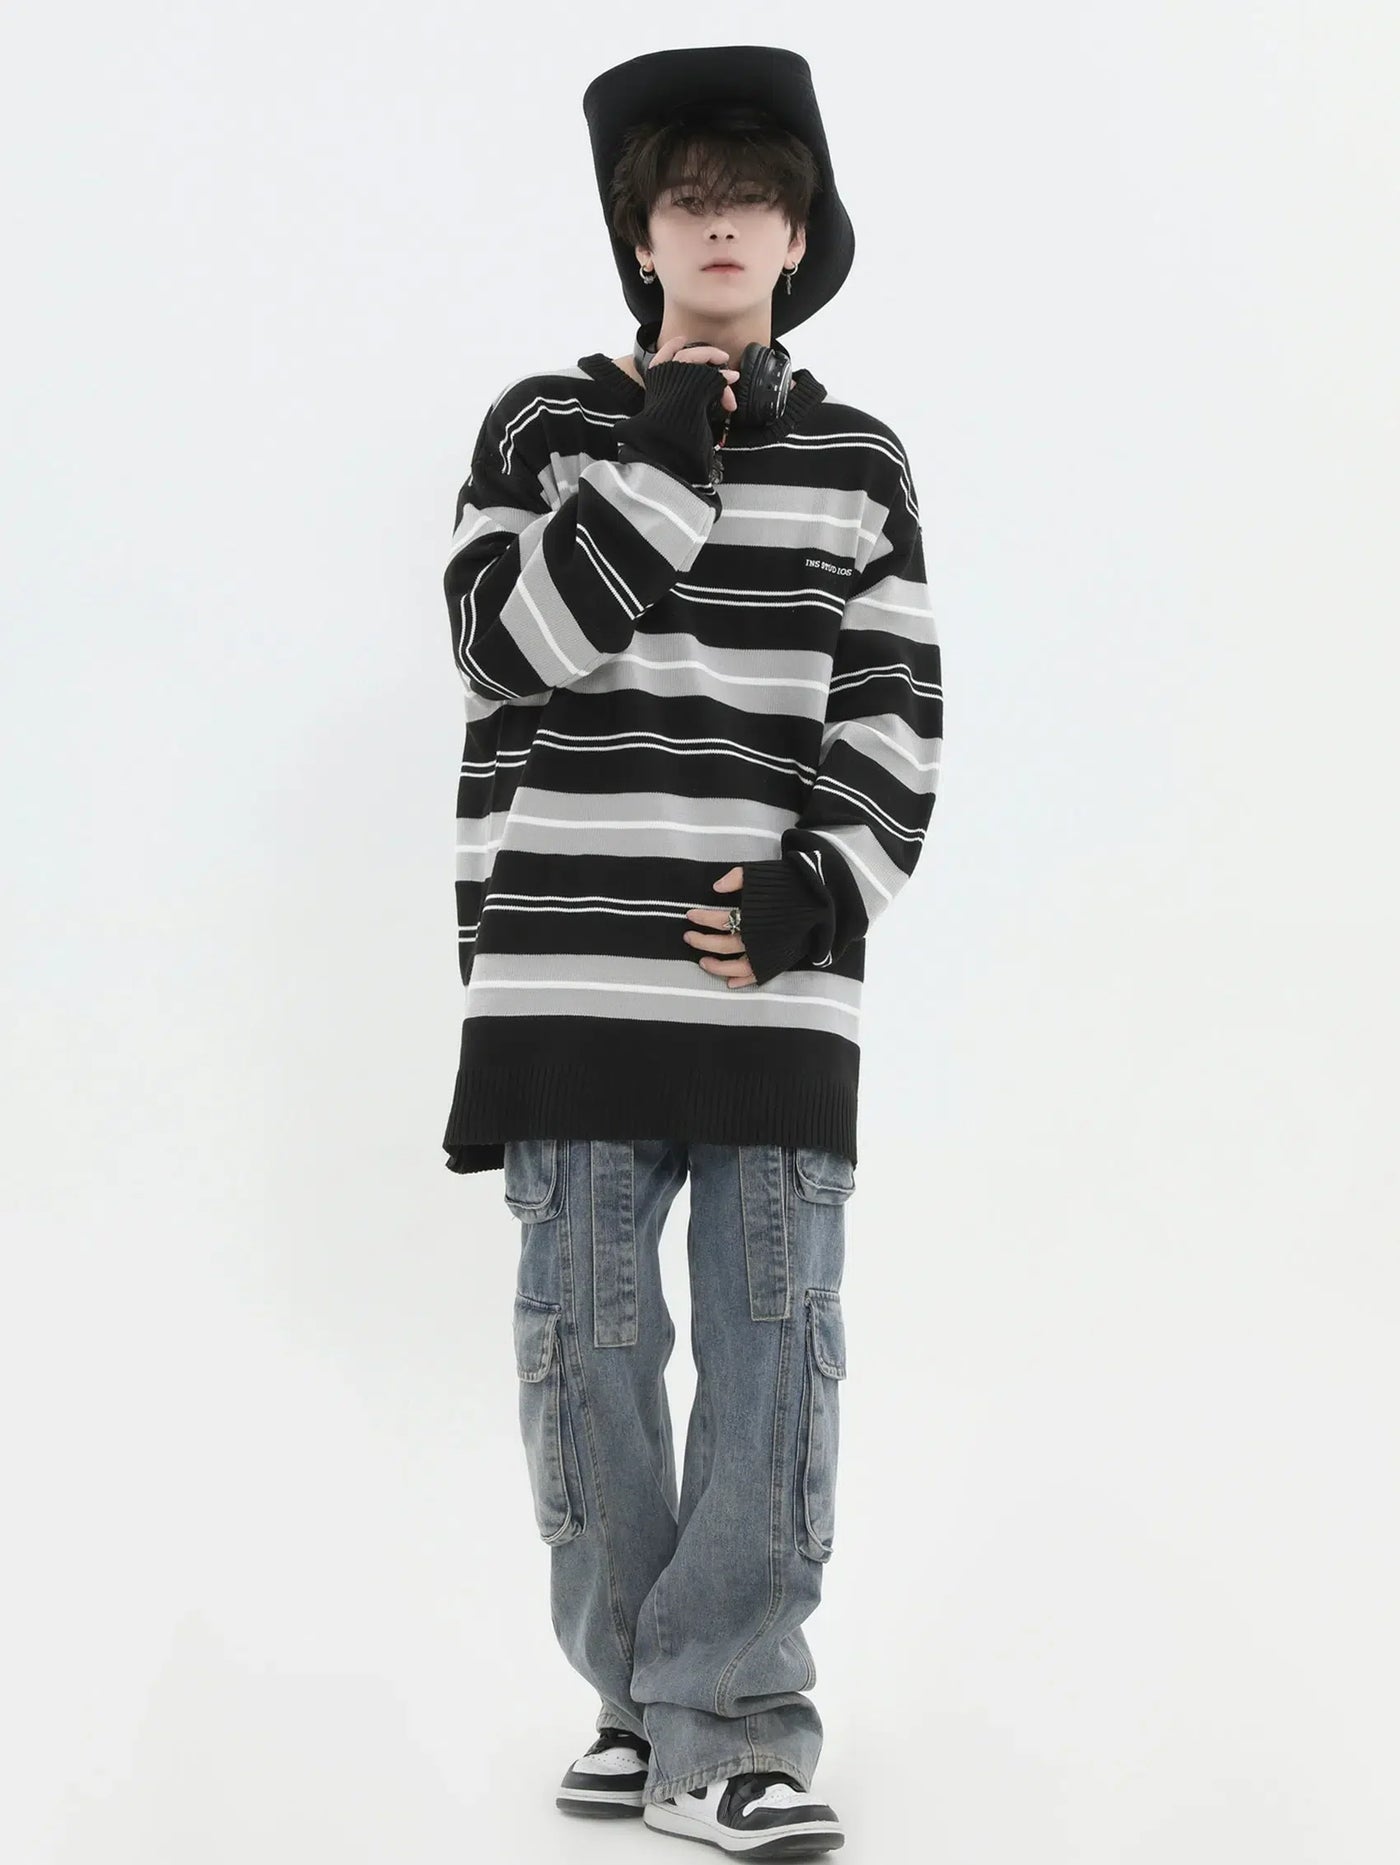 INS Korea Tri Tone Striped Loose Sweater Korean Street Fashion Sweater By INS Korea Shop Online at OH Vault